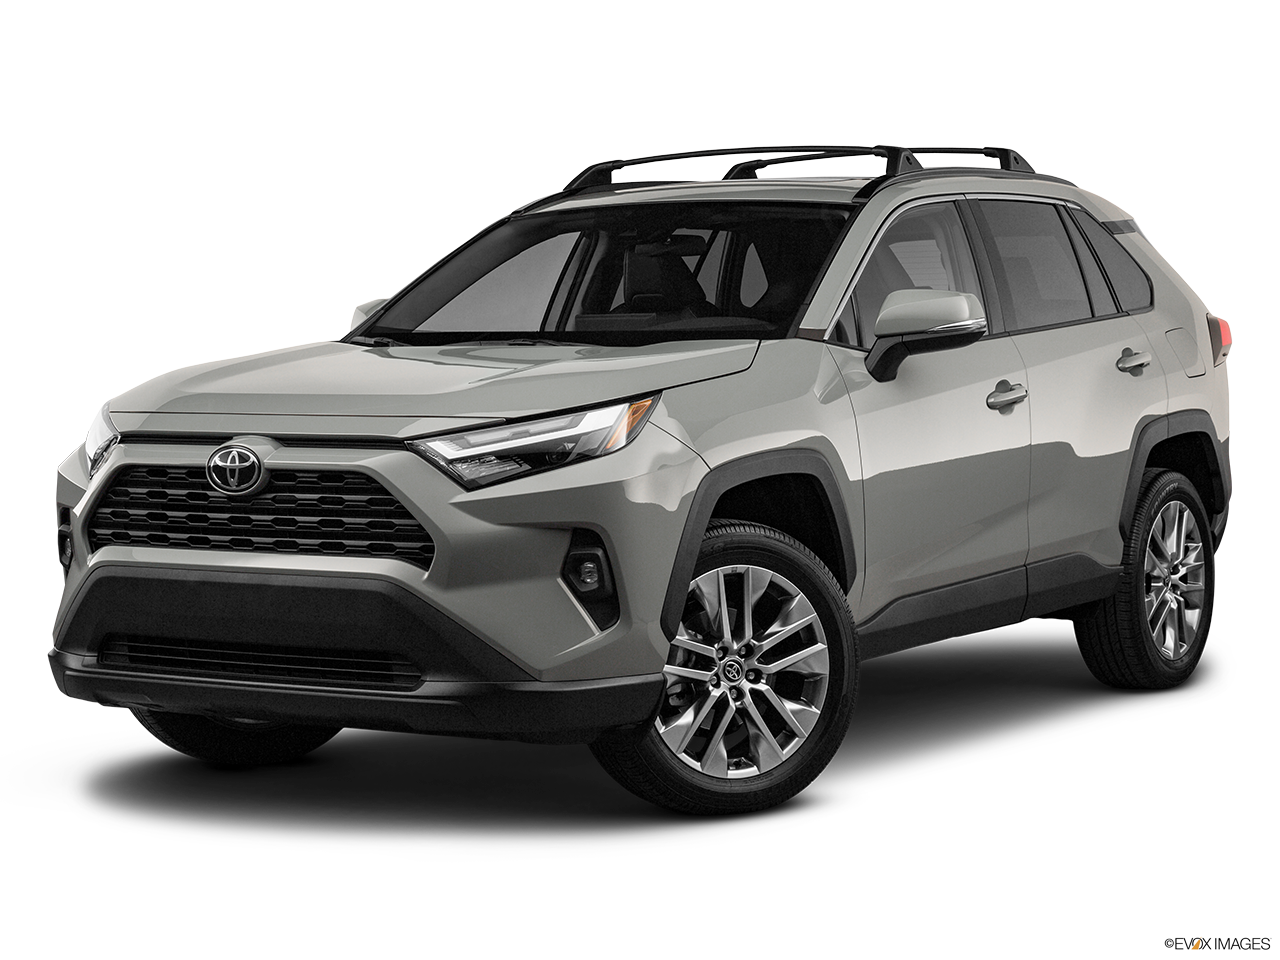 Toyota RAV4 generations, reviews, research, photos, specs, and